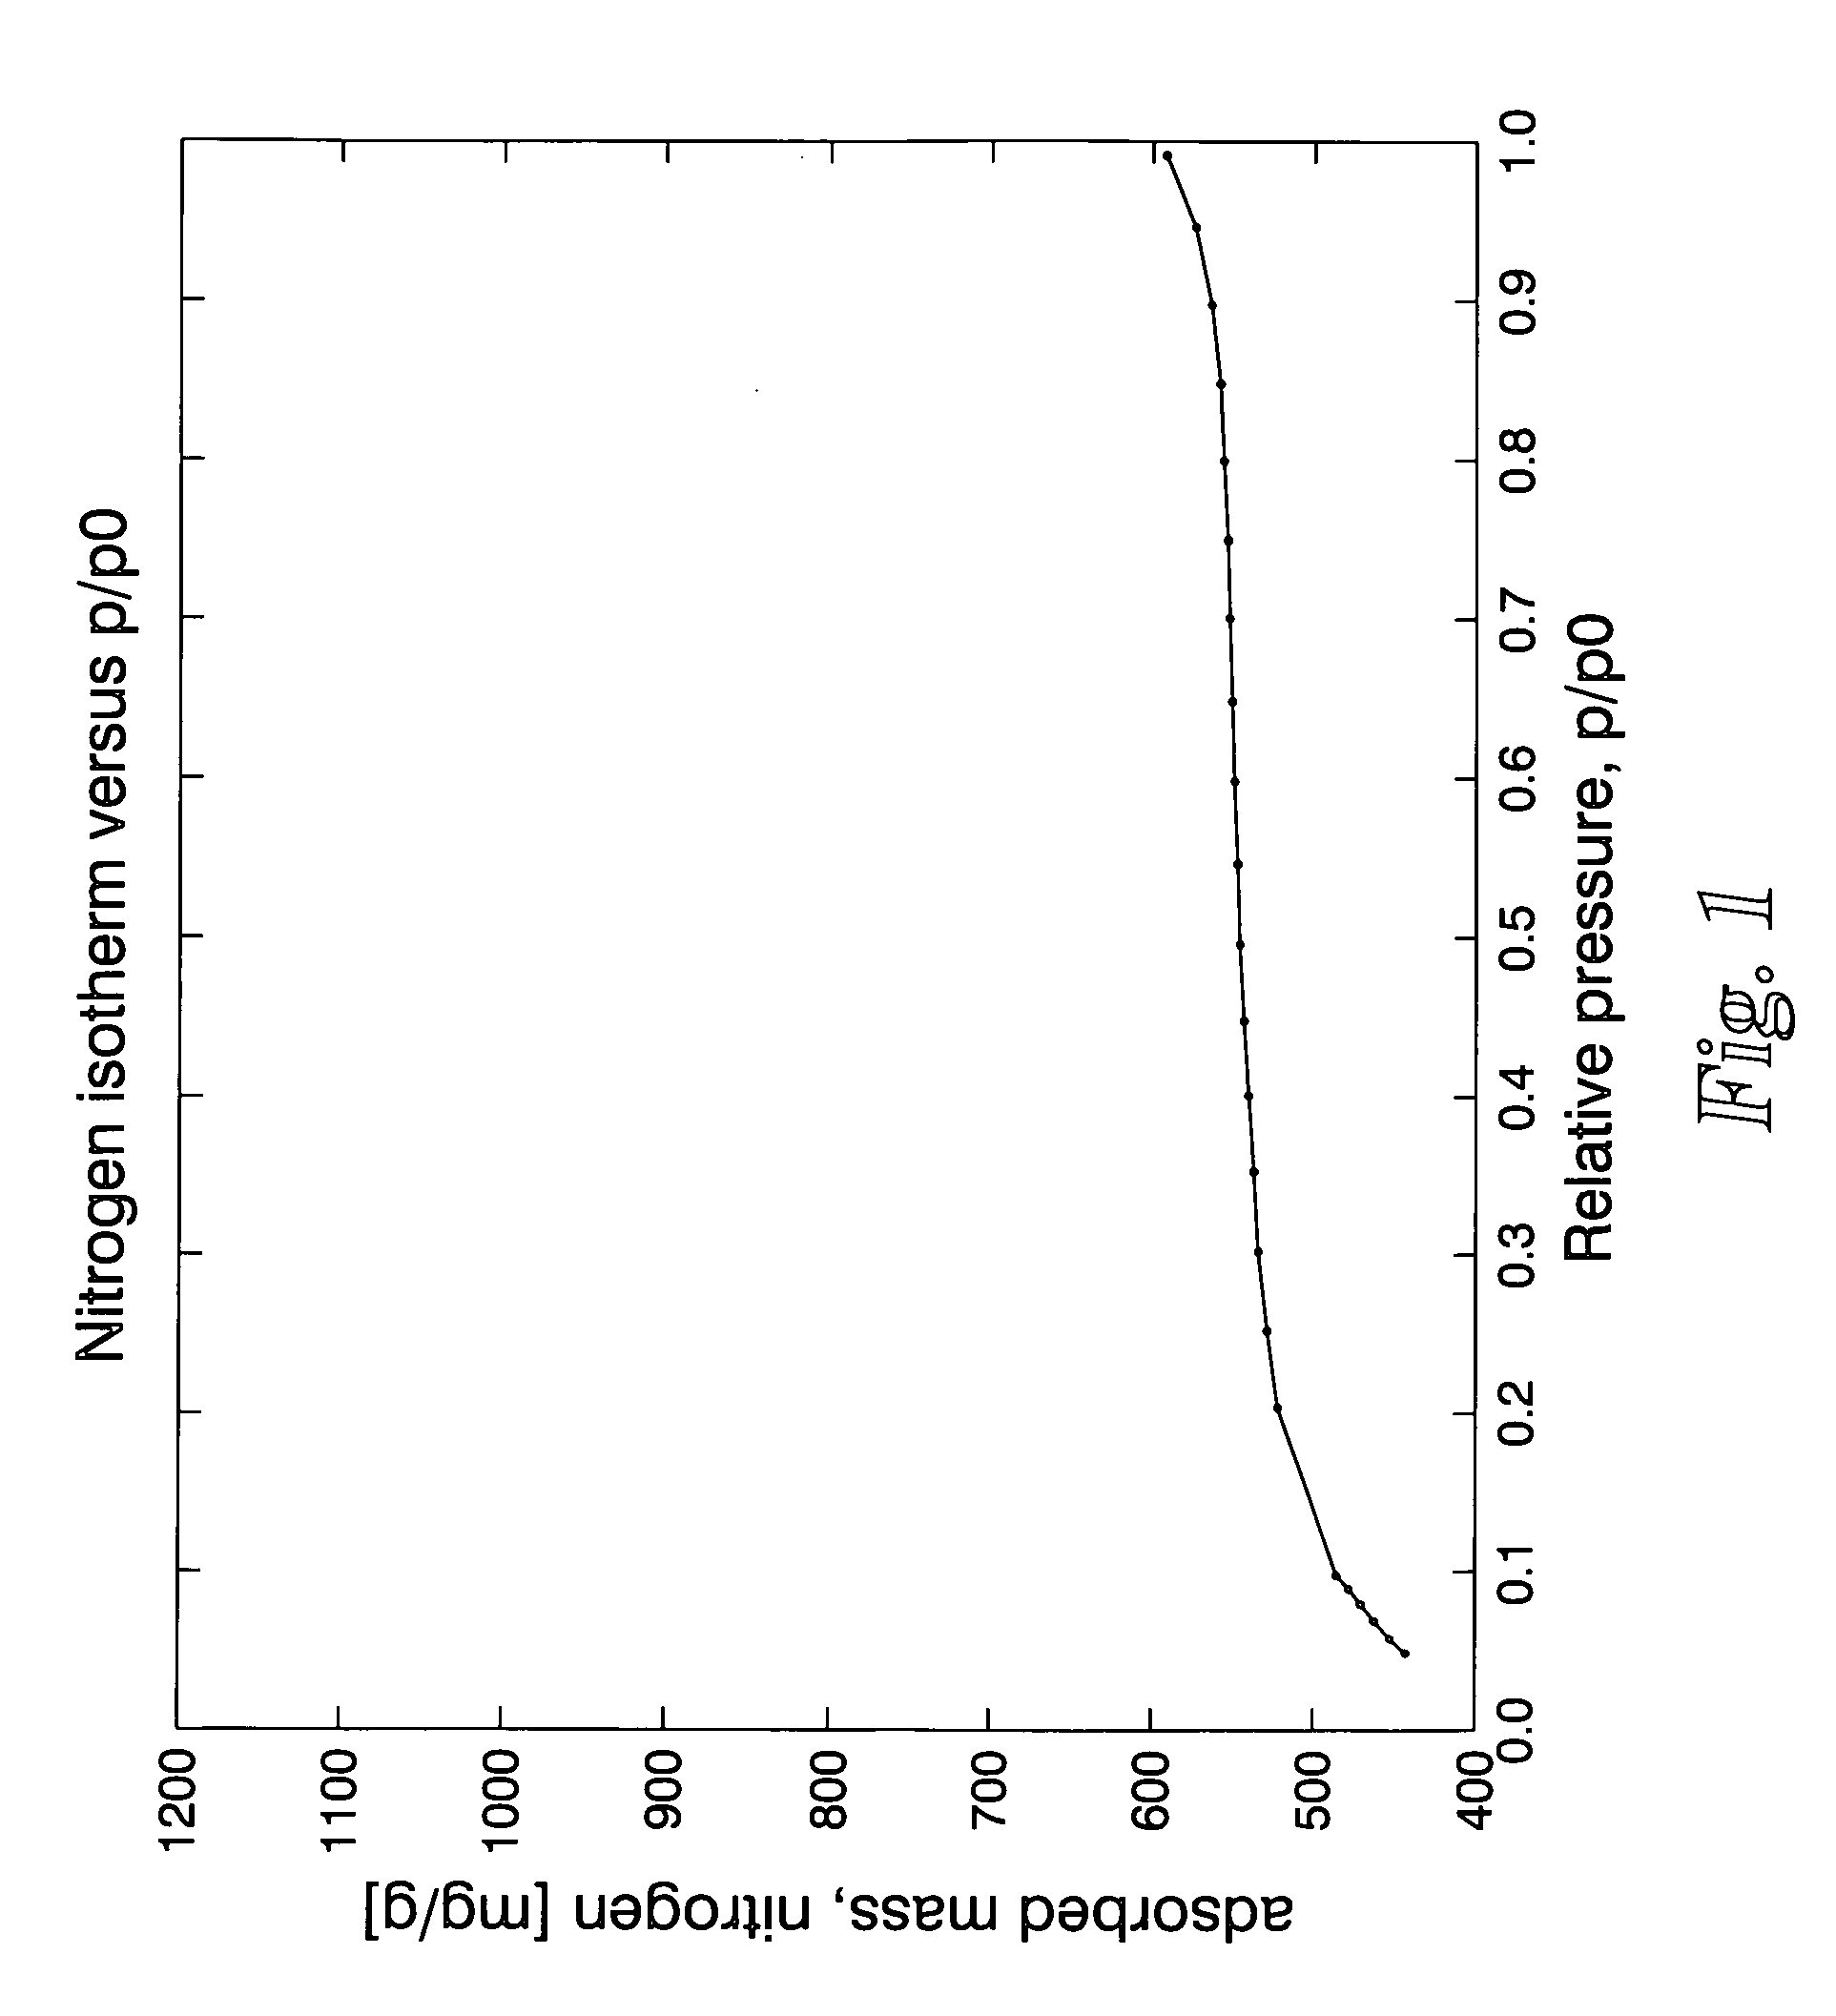 High performance adsorbents based on activated carbon of high Microporosity